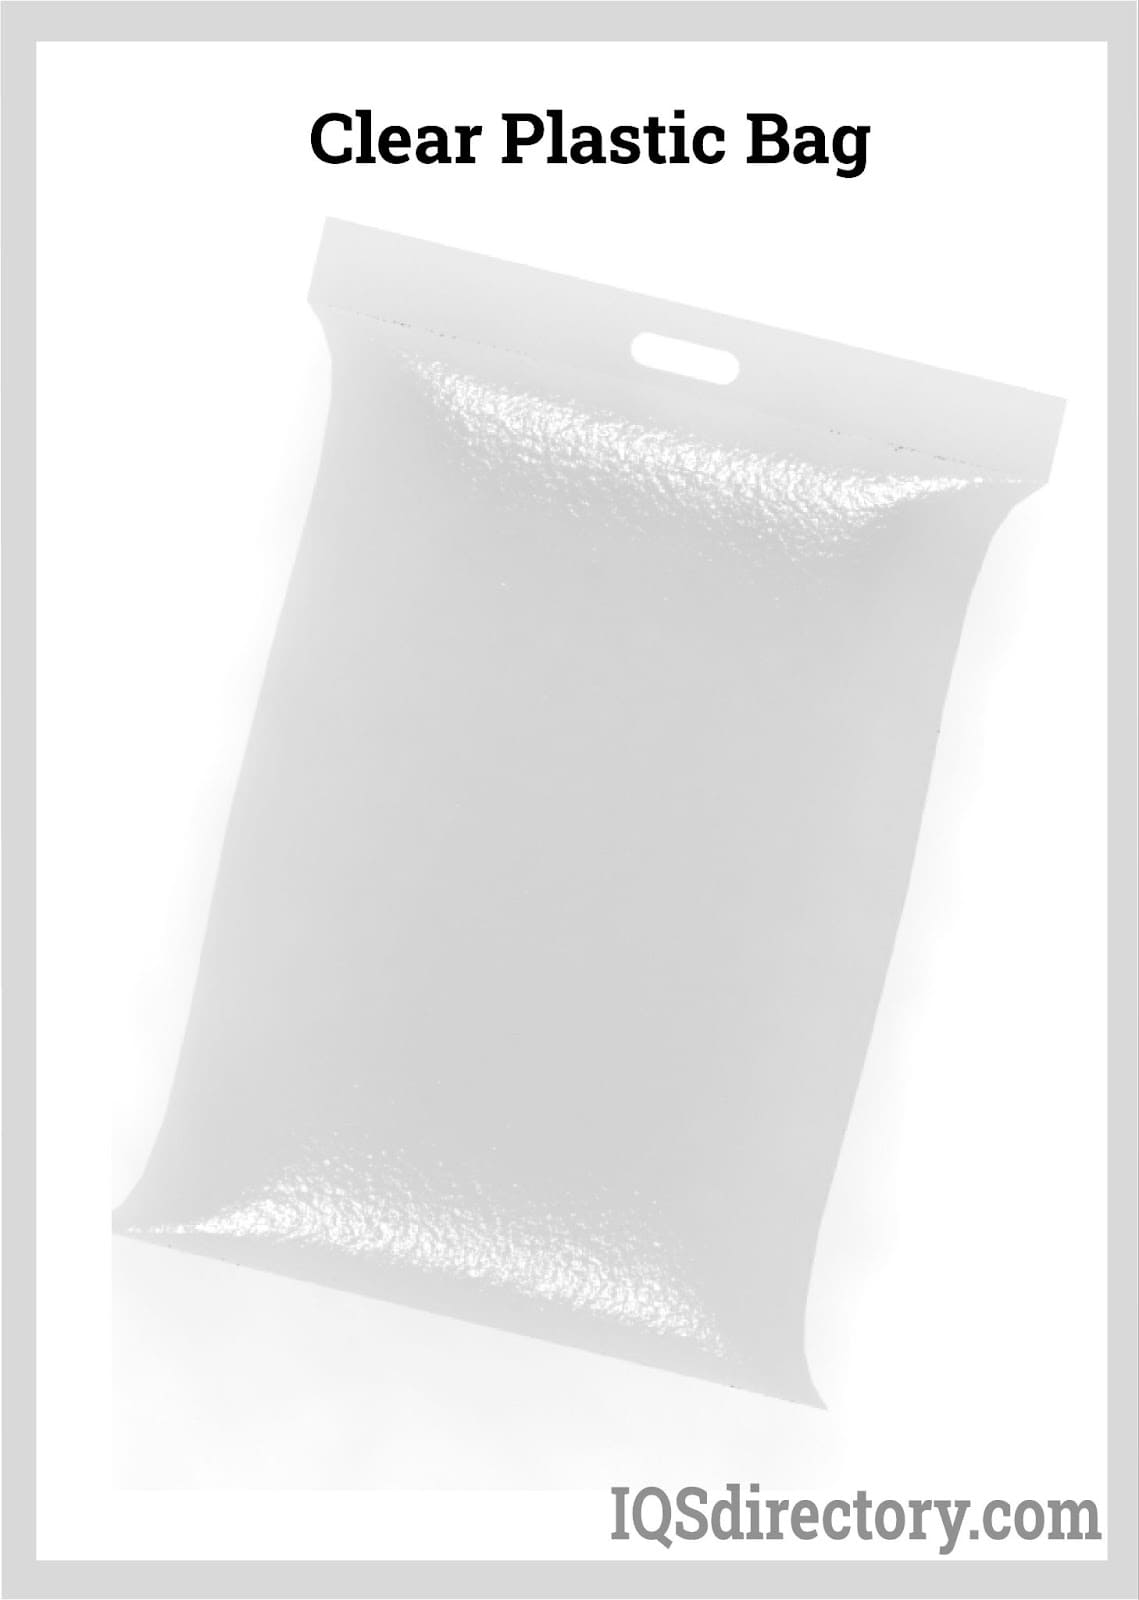 LDPE Plain Transparent plastic bags, For Packaging, Bag Size: 8 X